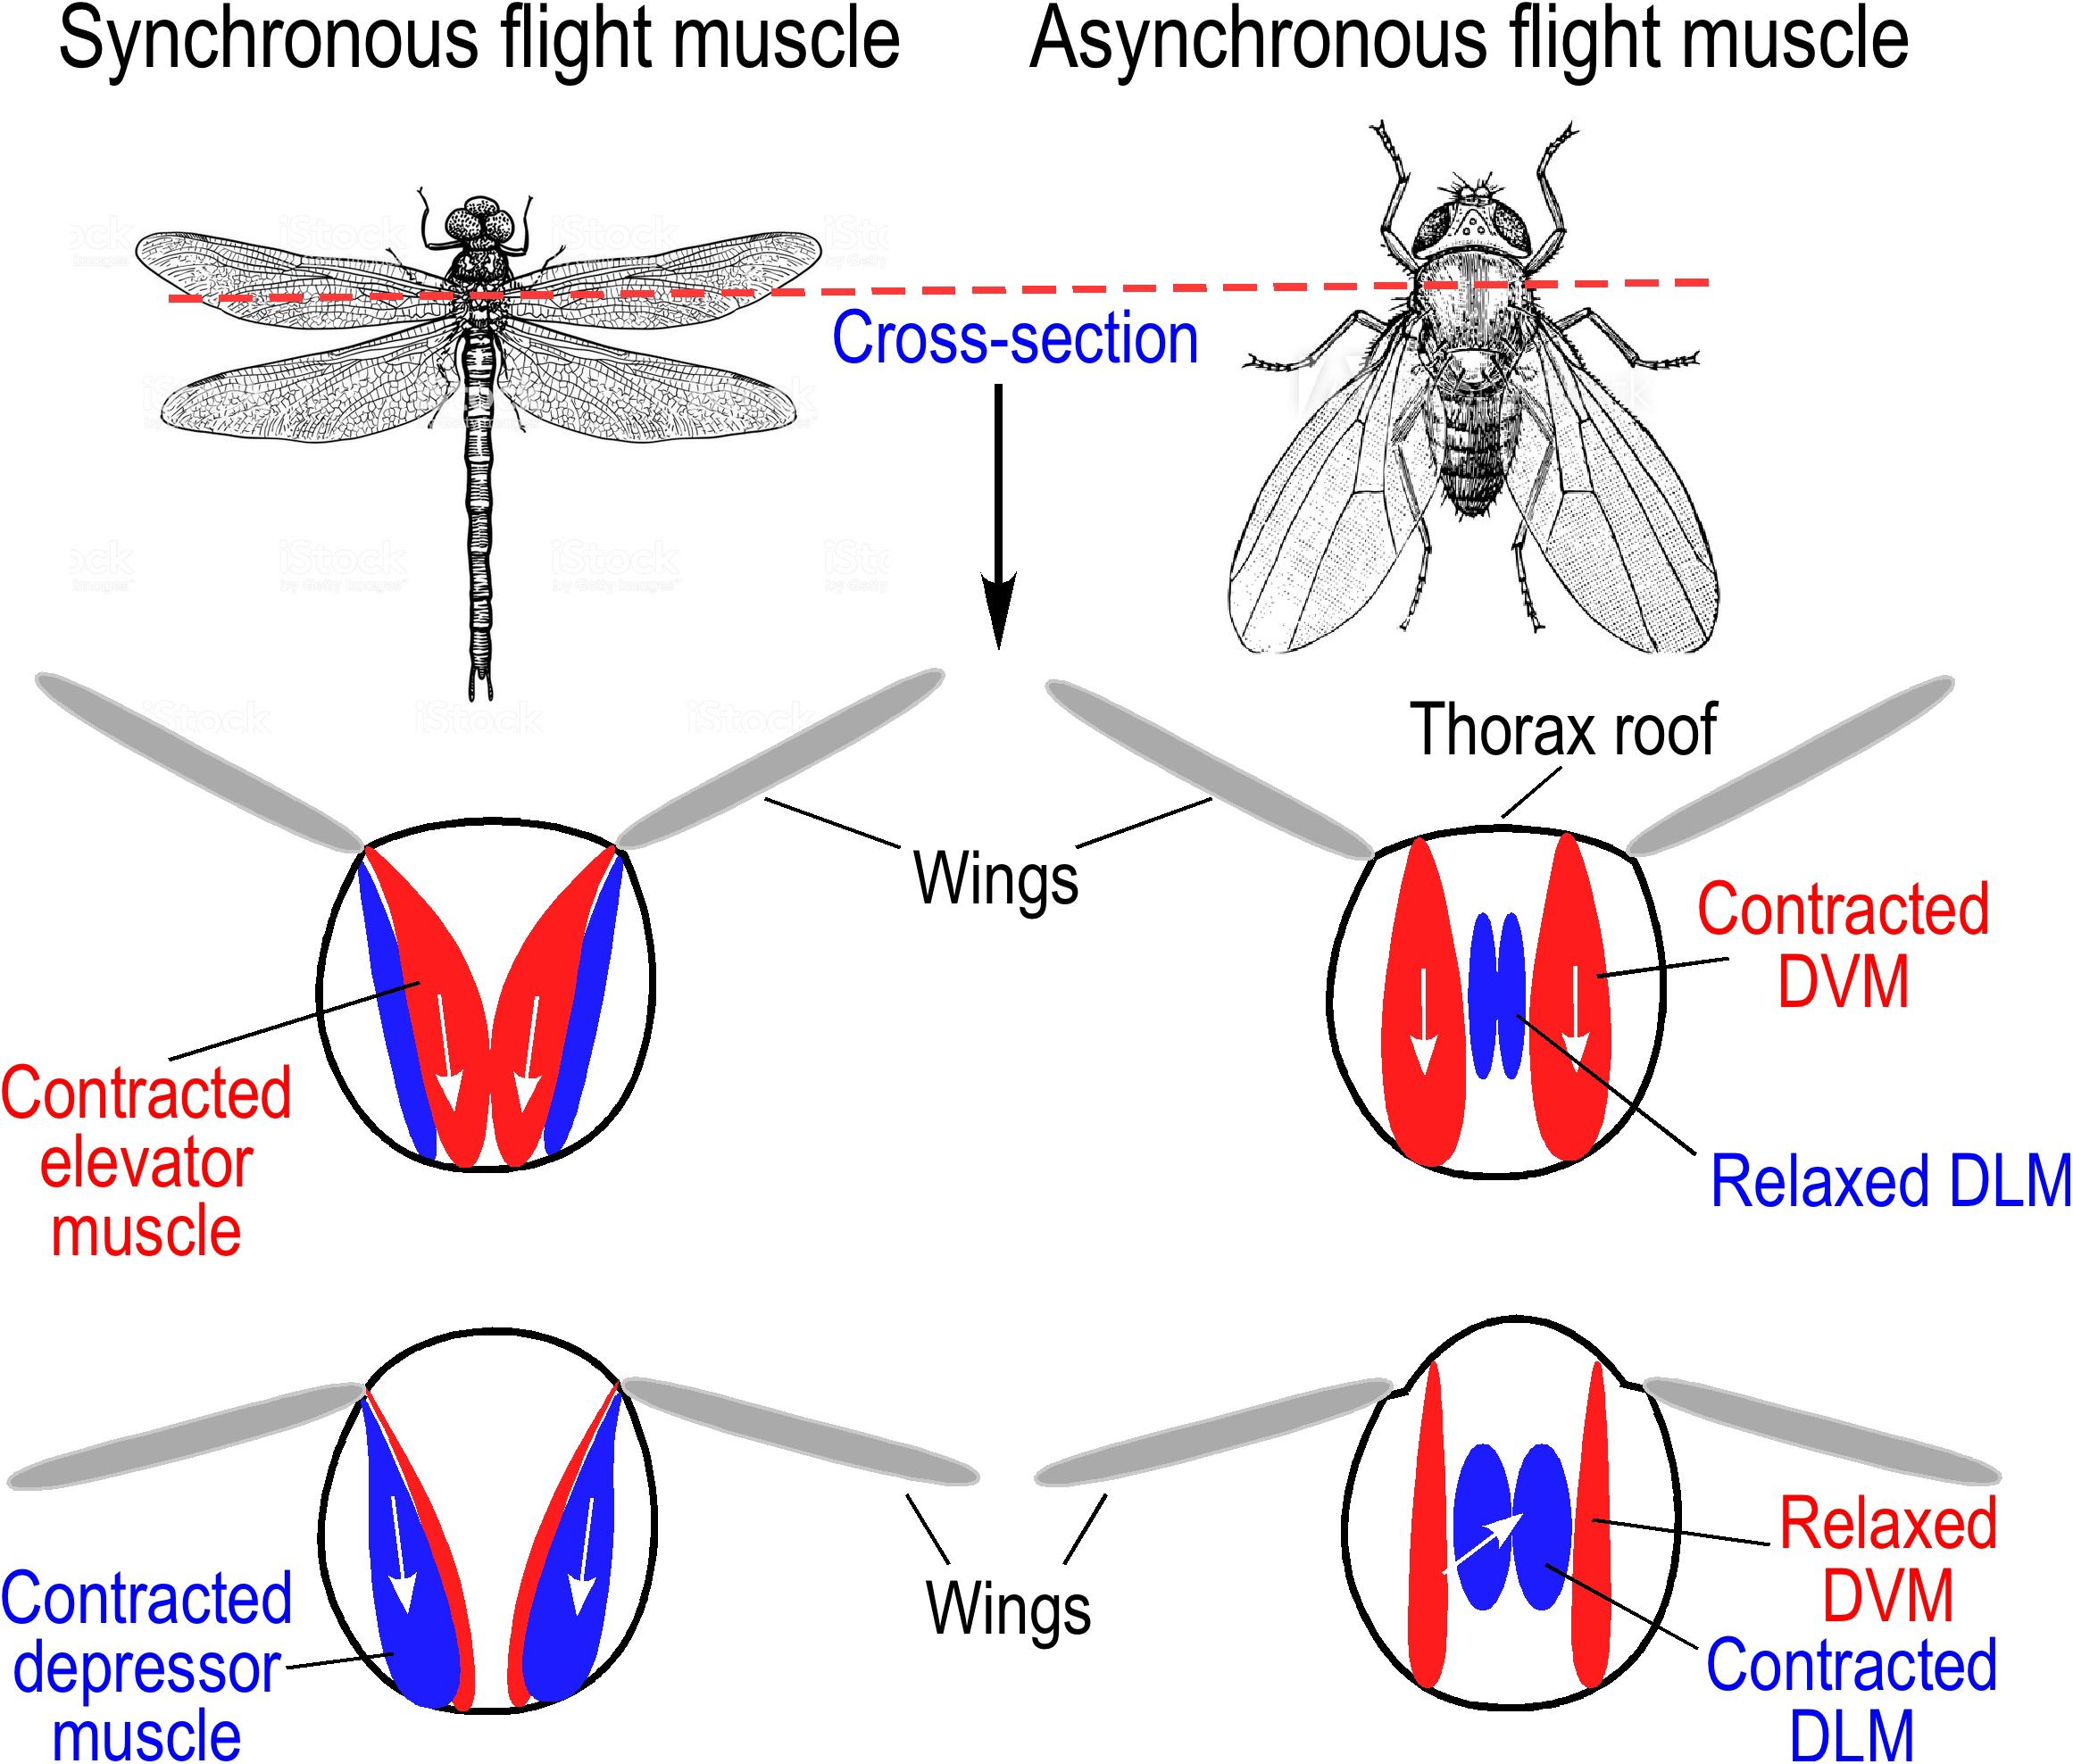 pectoral muscles in birds